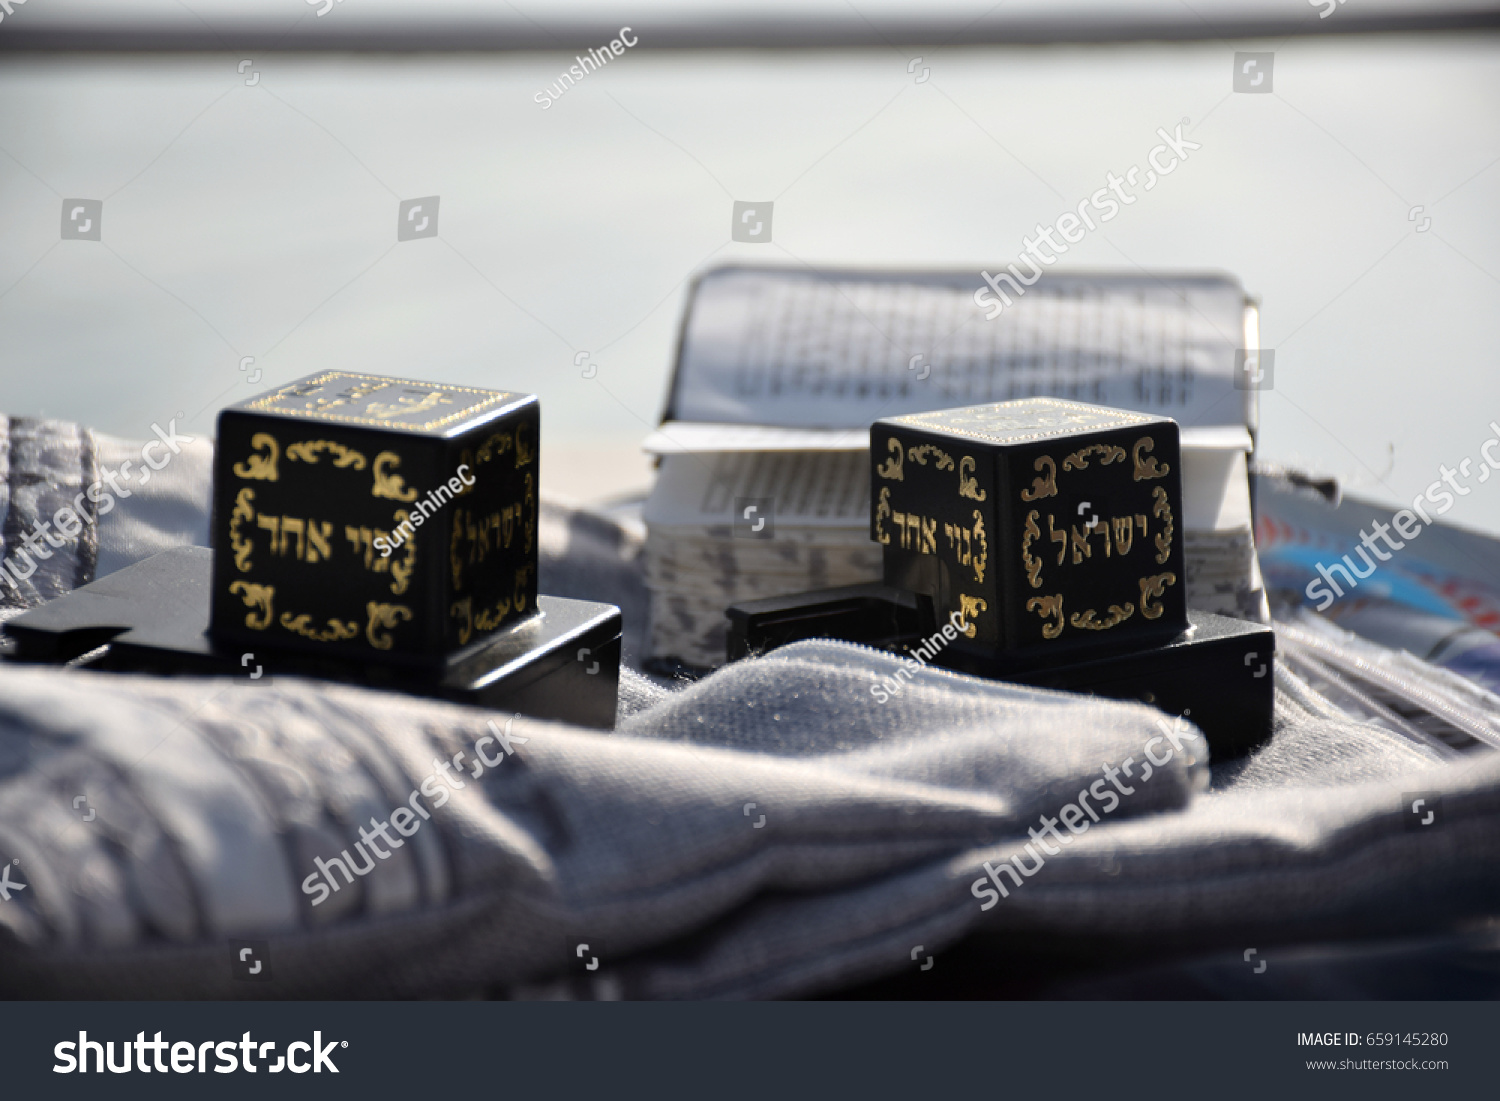 Tefillin (Judaica item using for the famous jewish prayer "Shema Israel" - hear us our lord) and the Jewish bible on a Shawl bag. #659145280